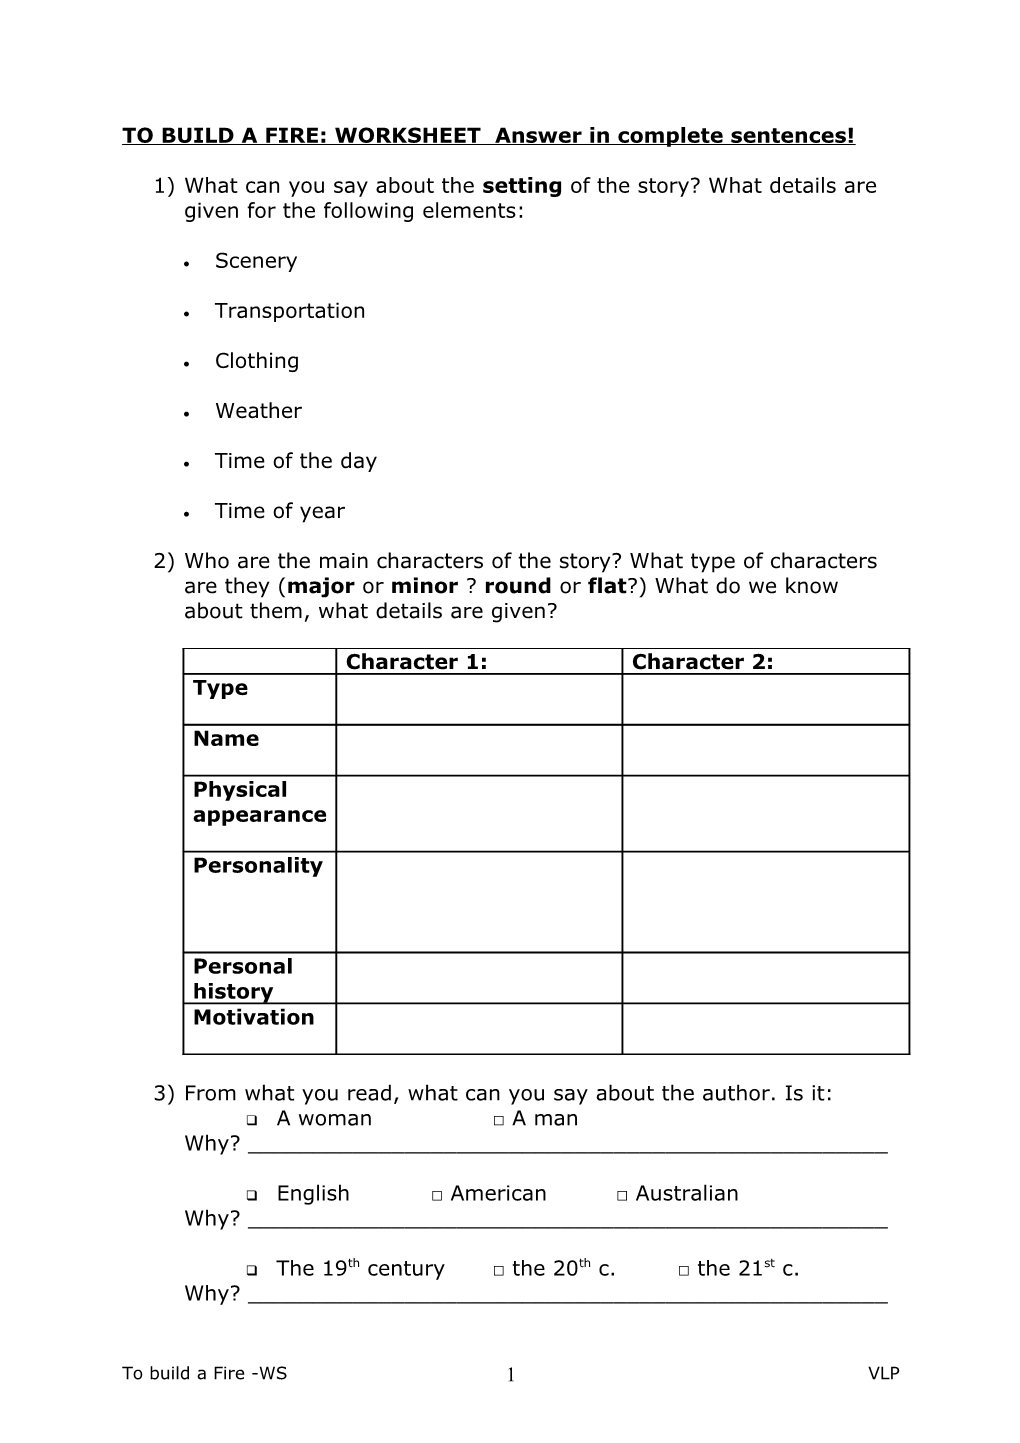 To Build a Fire: Worksheet